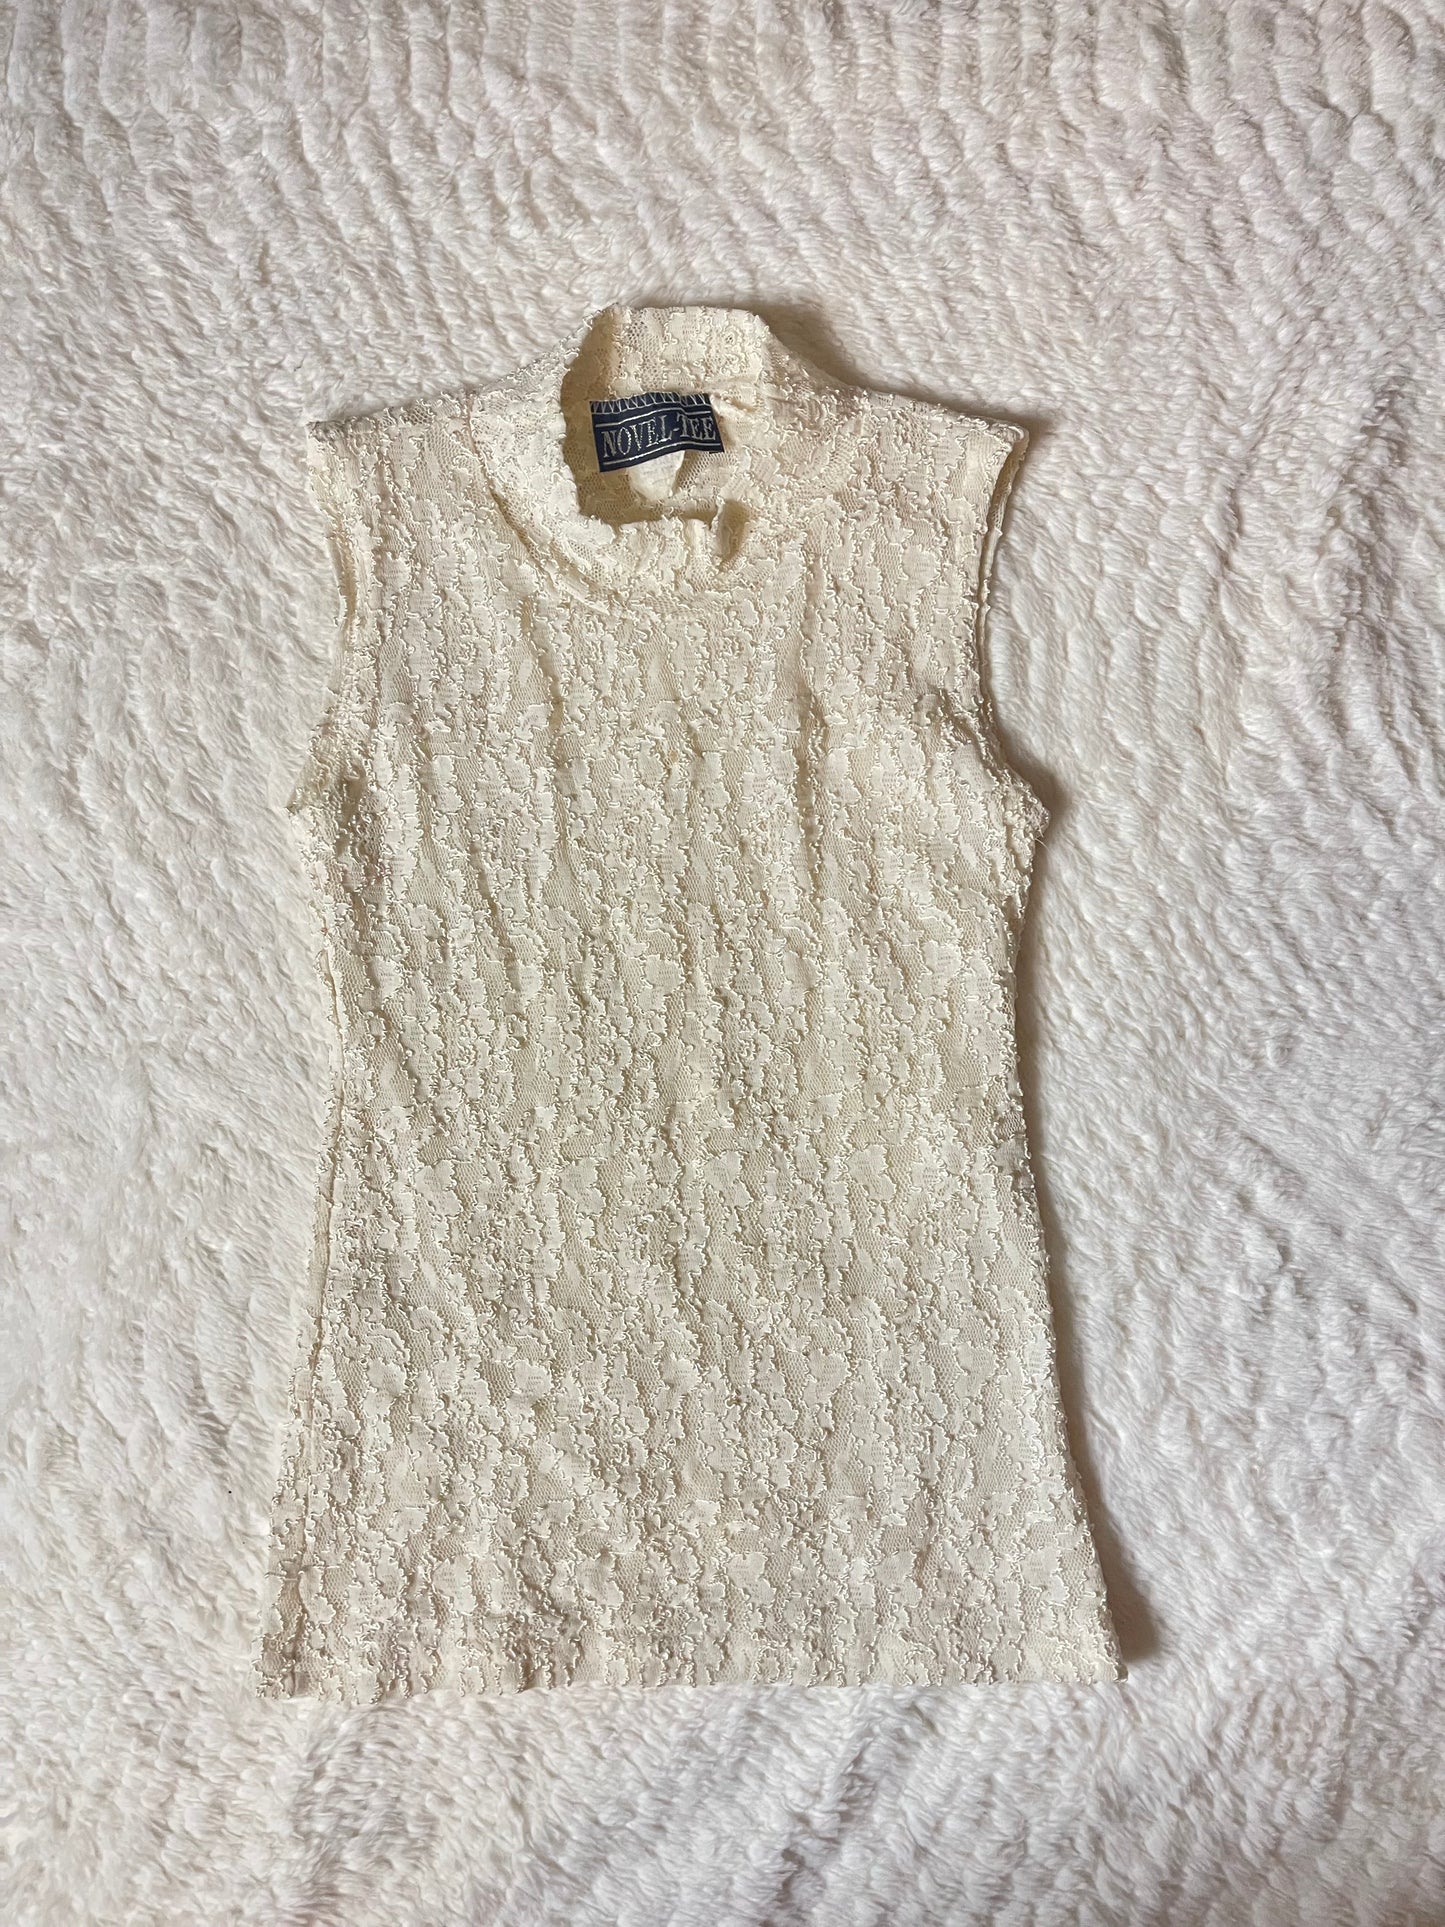 Vintage fully lace tank top